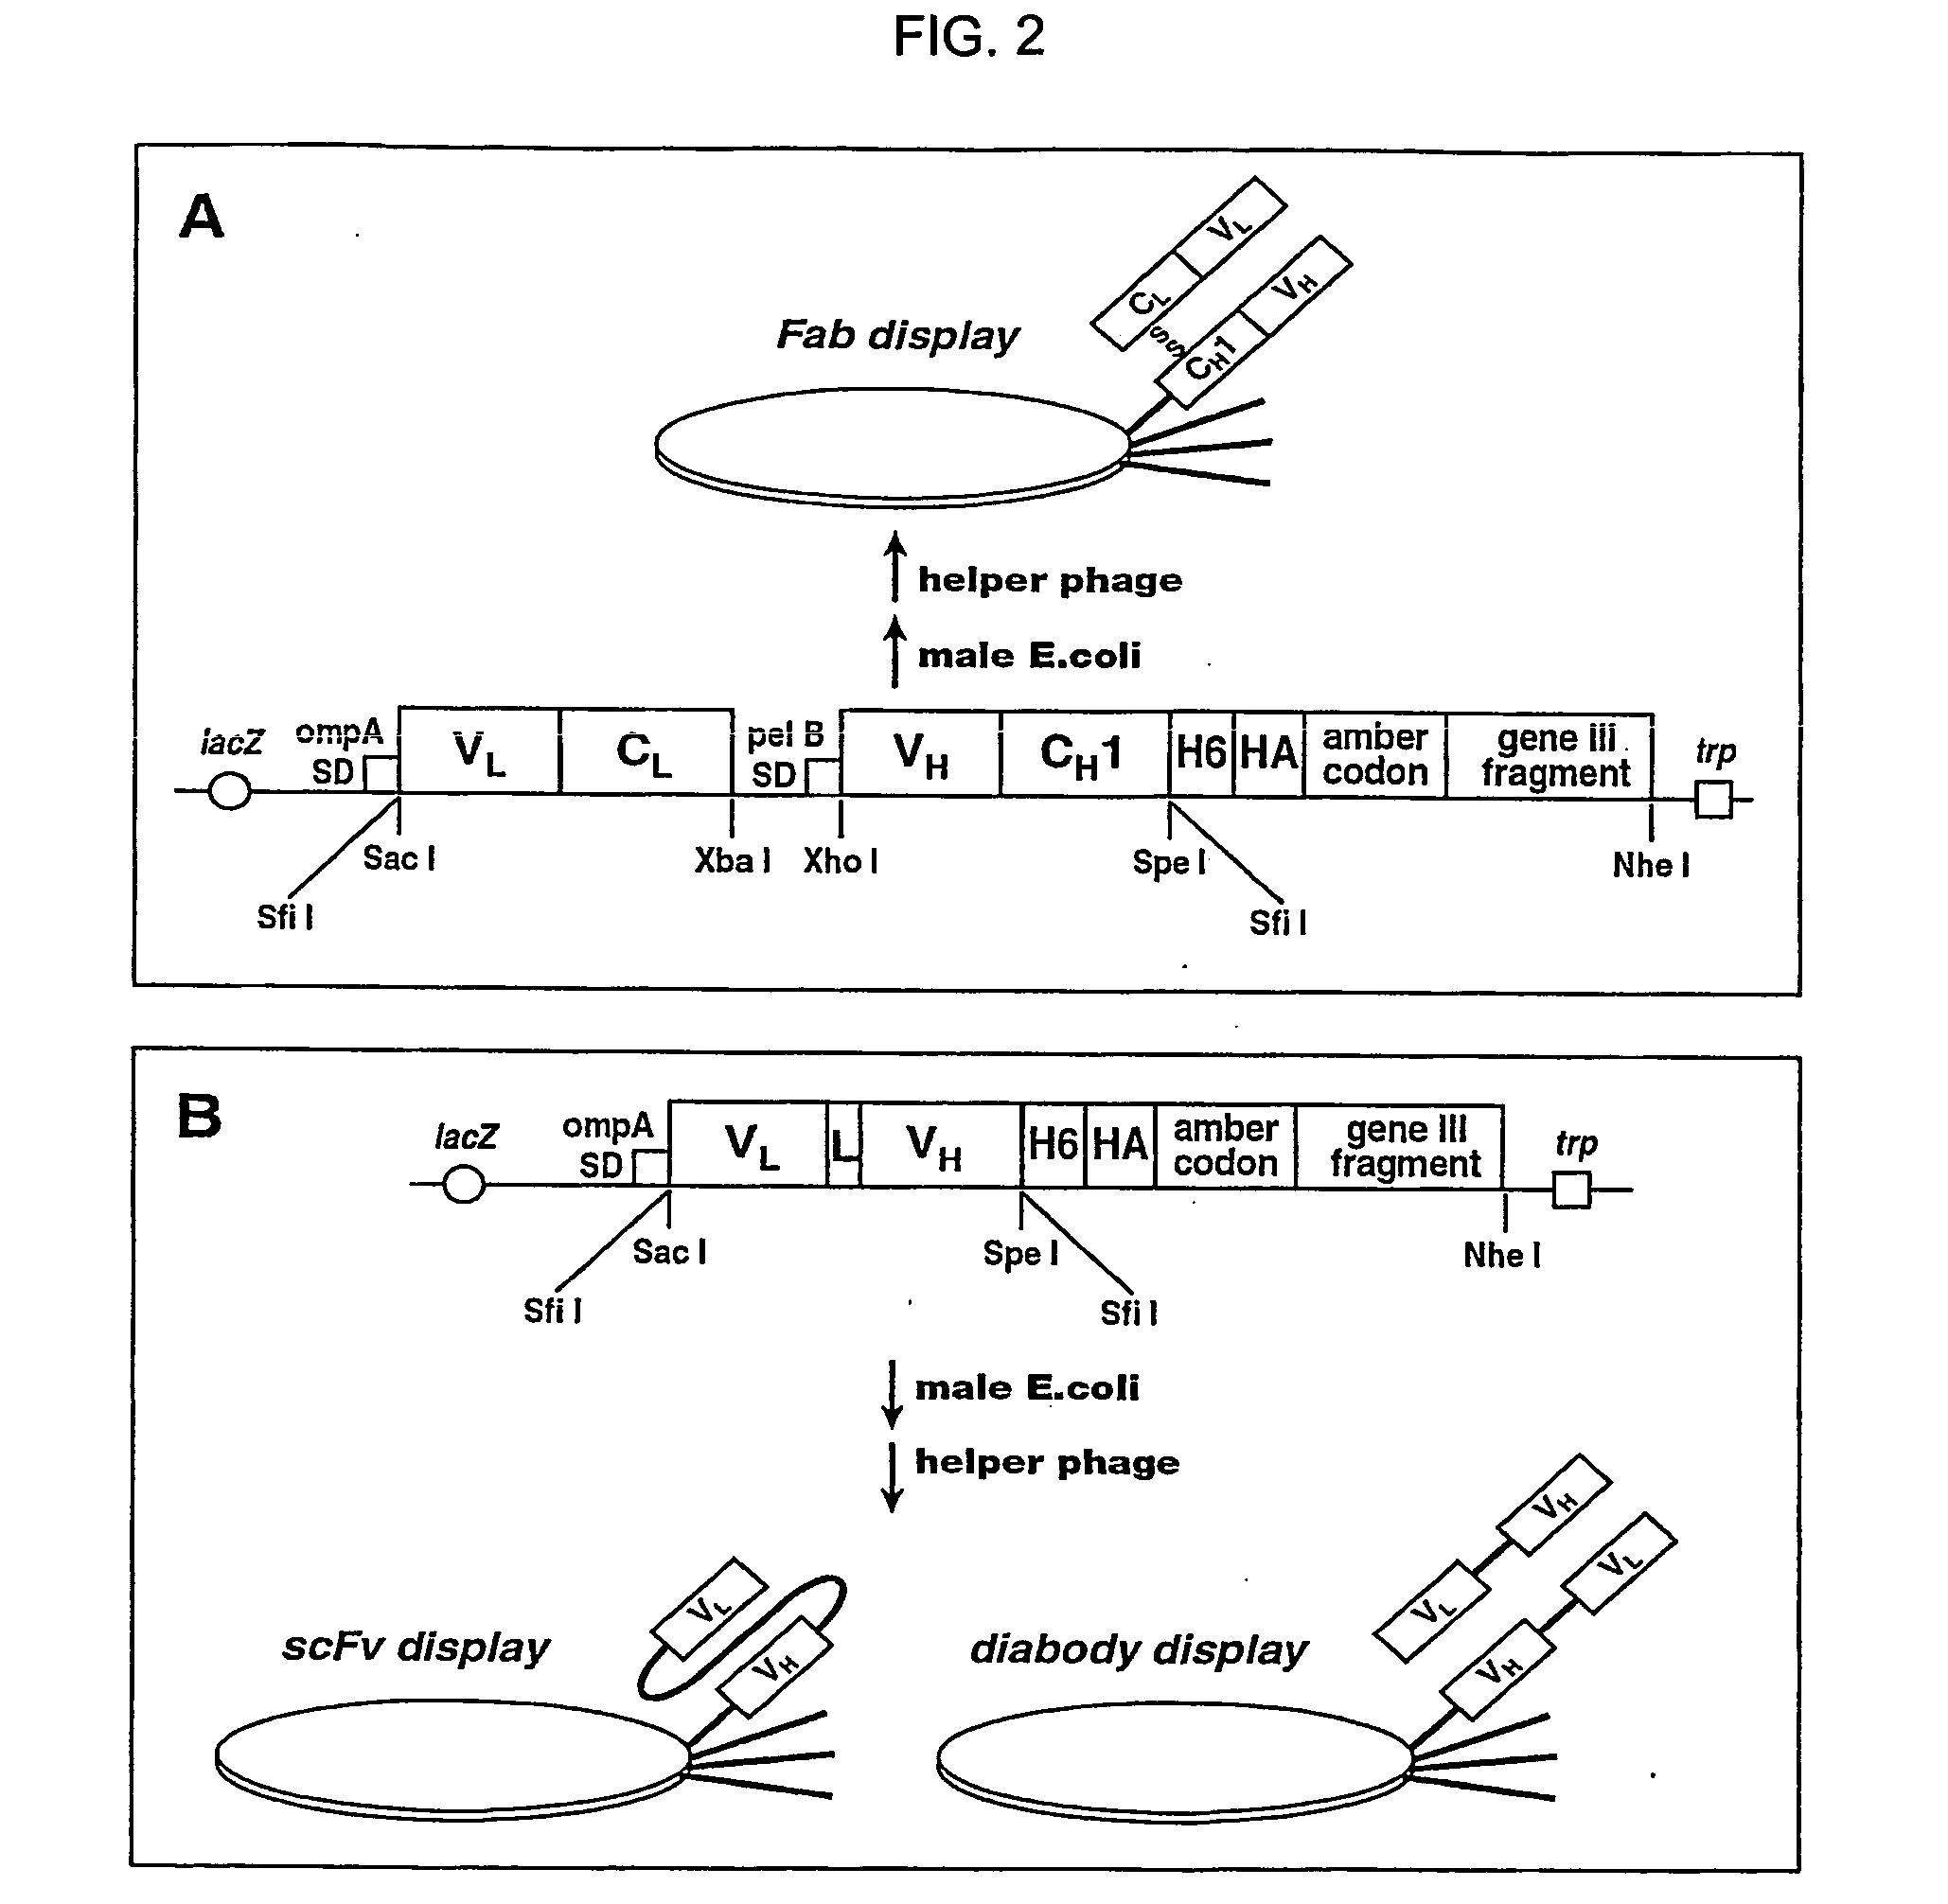 Neutralizable Epitope of HGF and Neutralizing Antibody Binding to the Same